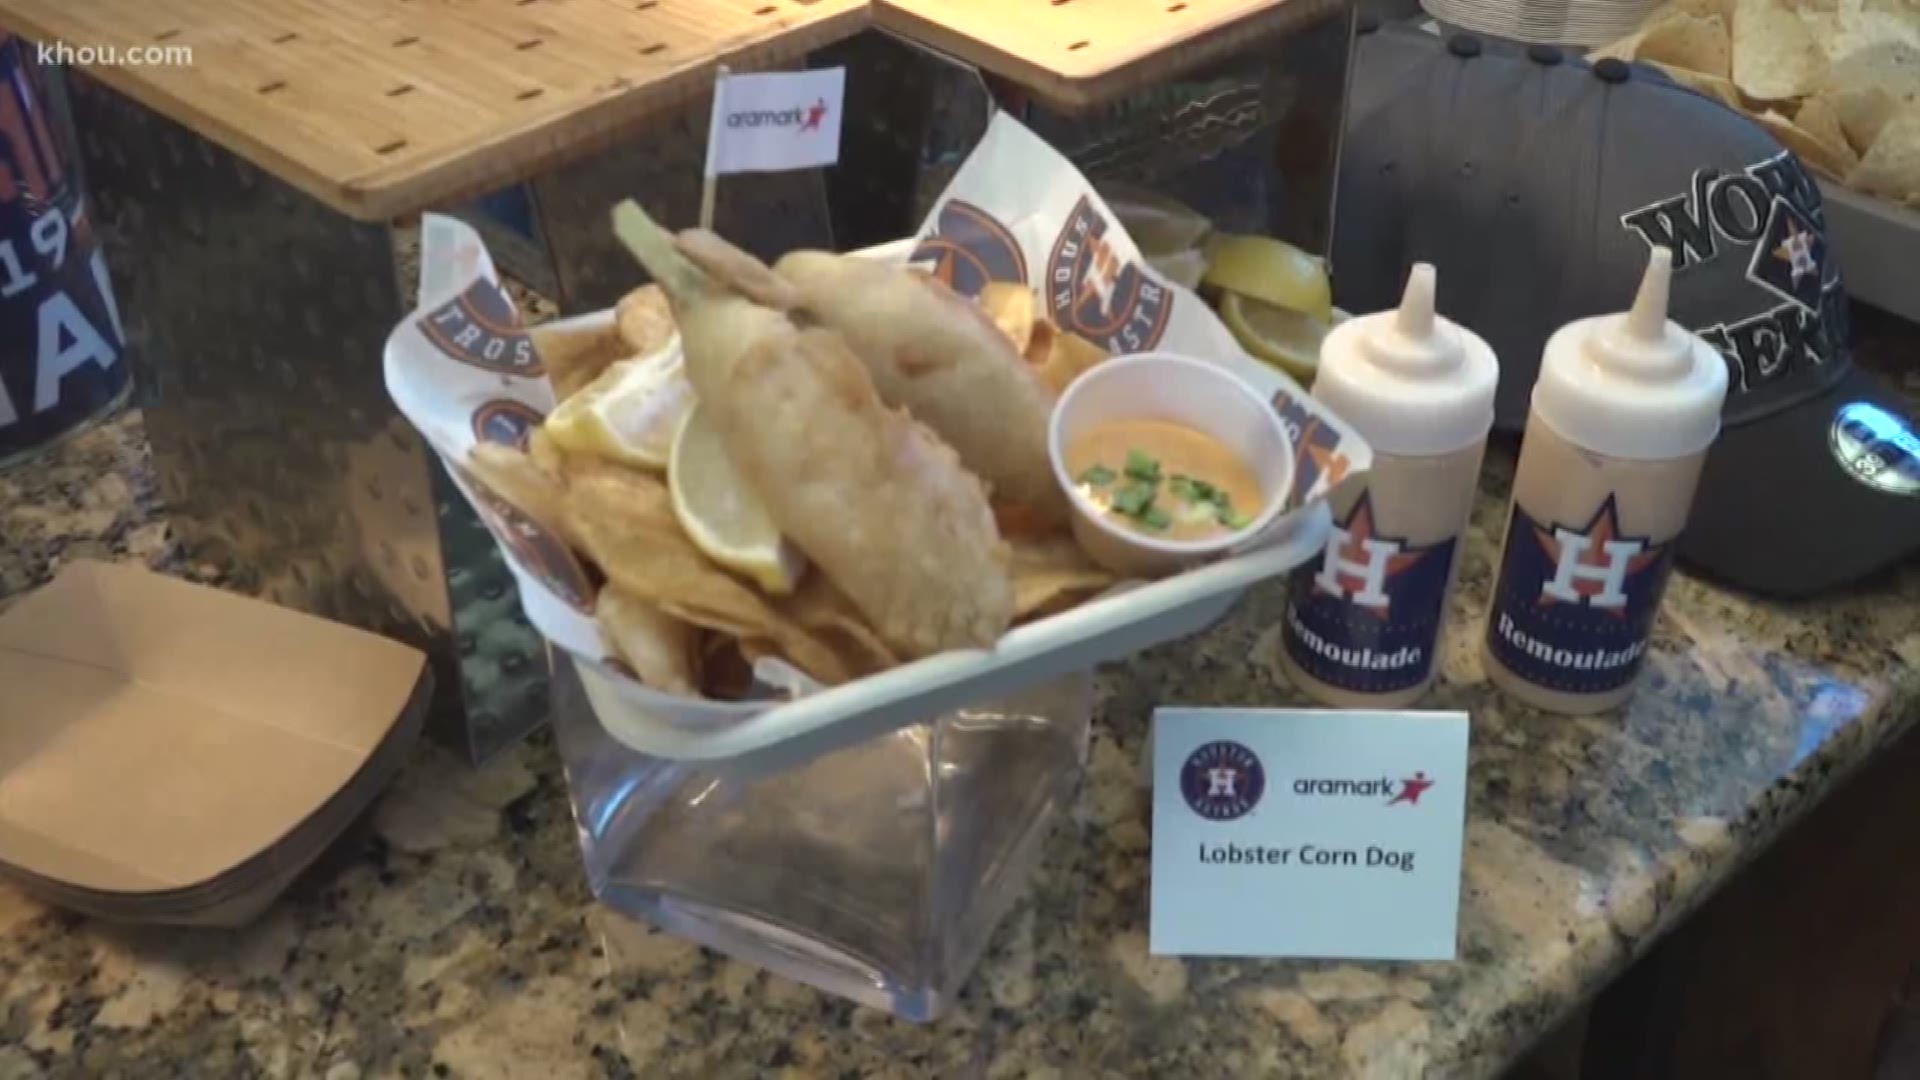 Ruben Galvan has a preview of some of the special food offerings available at Minute Maid Park during the World Series.